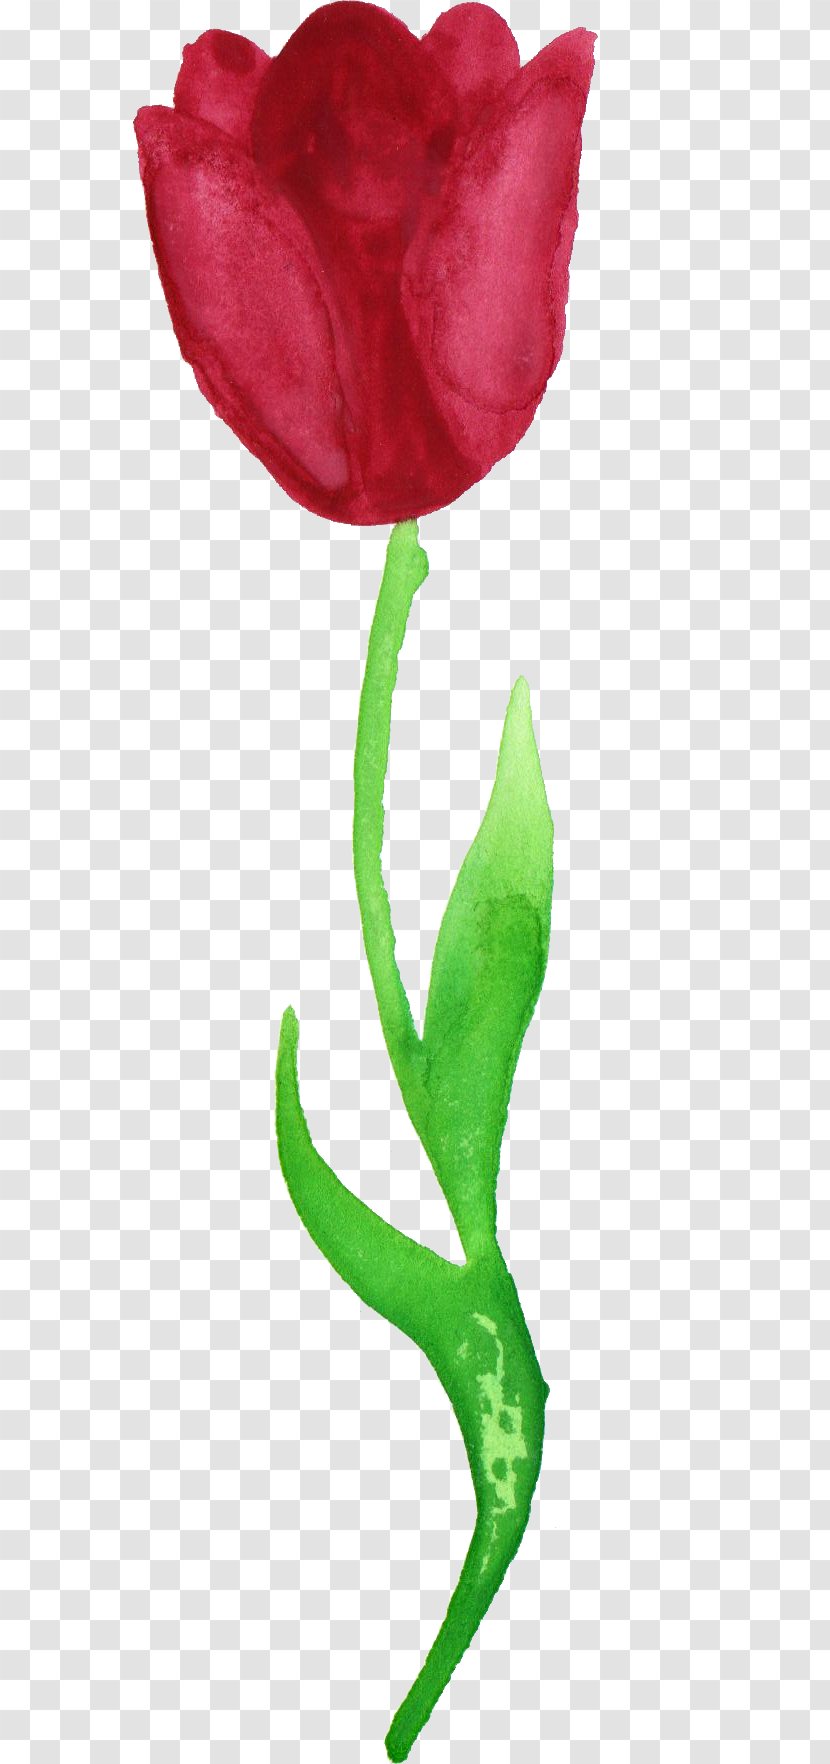 Tulip Cut Flowers Watercolor Painting - Seed Plant - Tulips Transparent PNG